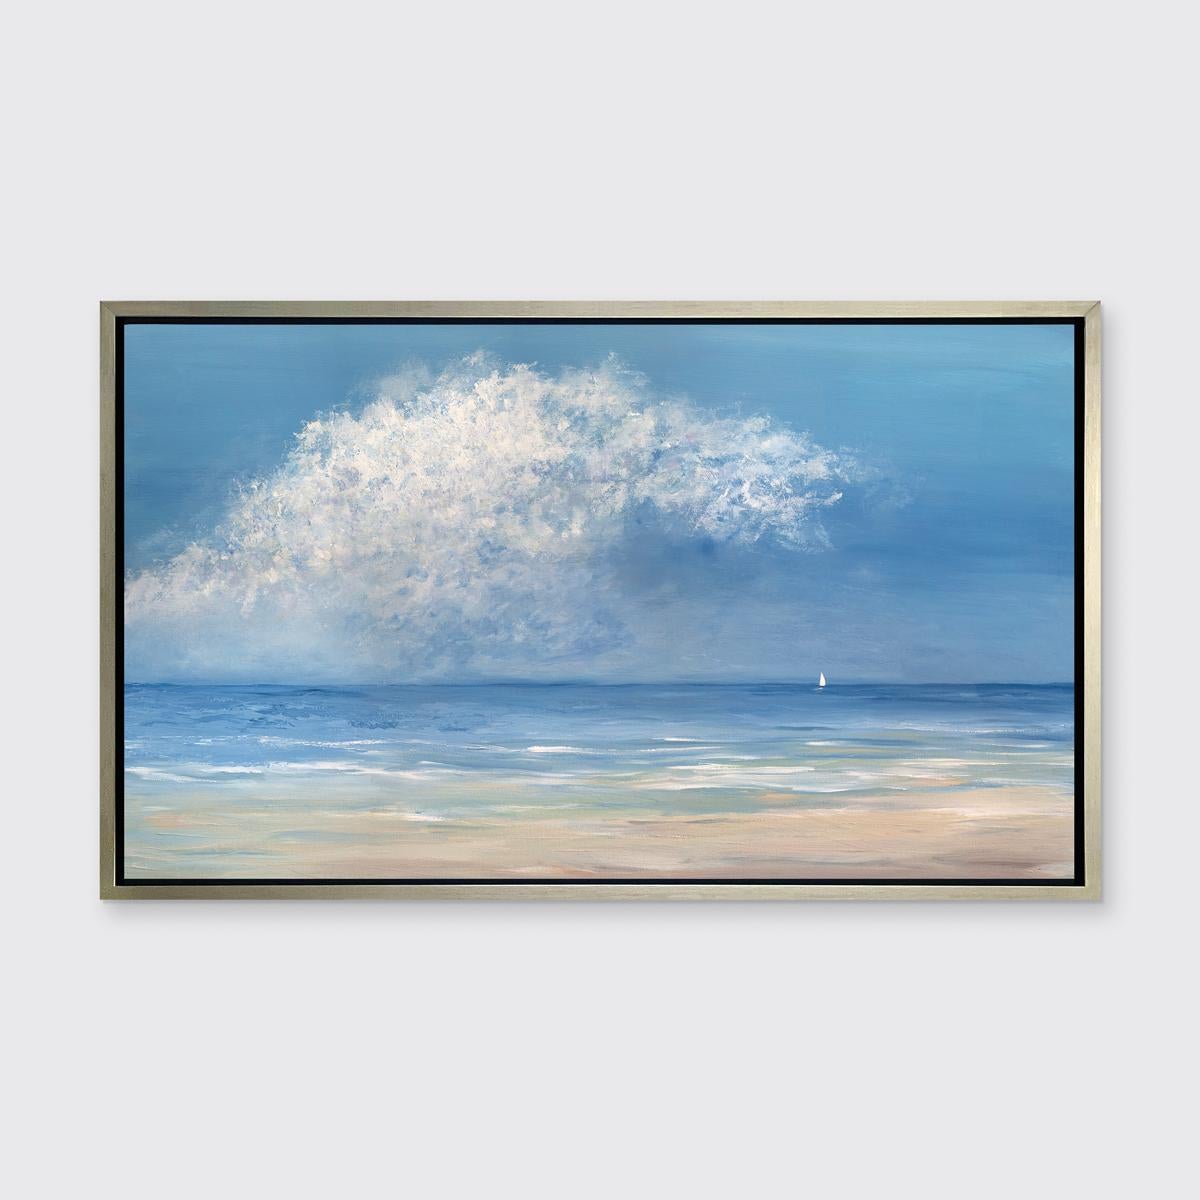 S. Cora Aldo Landscape Print - "On the Wind, " Framed Limited Edition Giclee Print, 36" x 60"